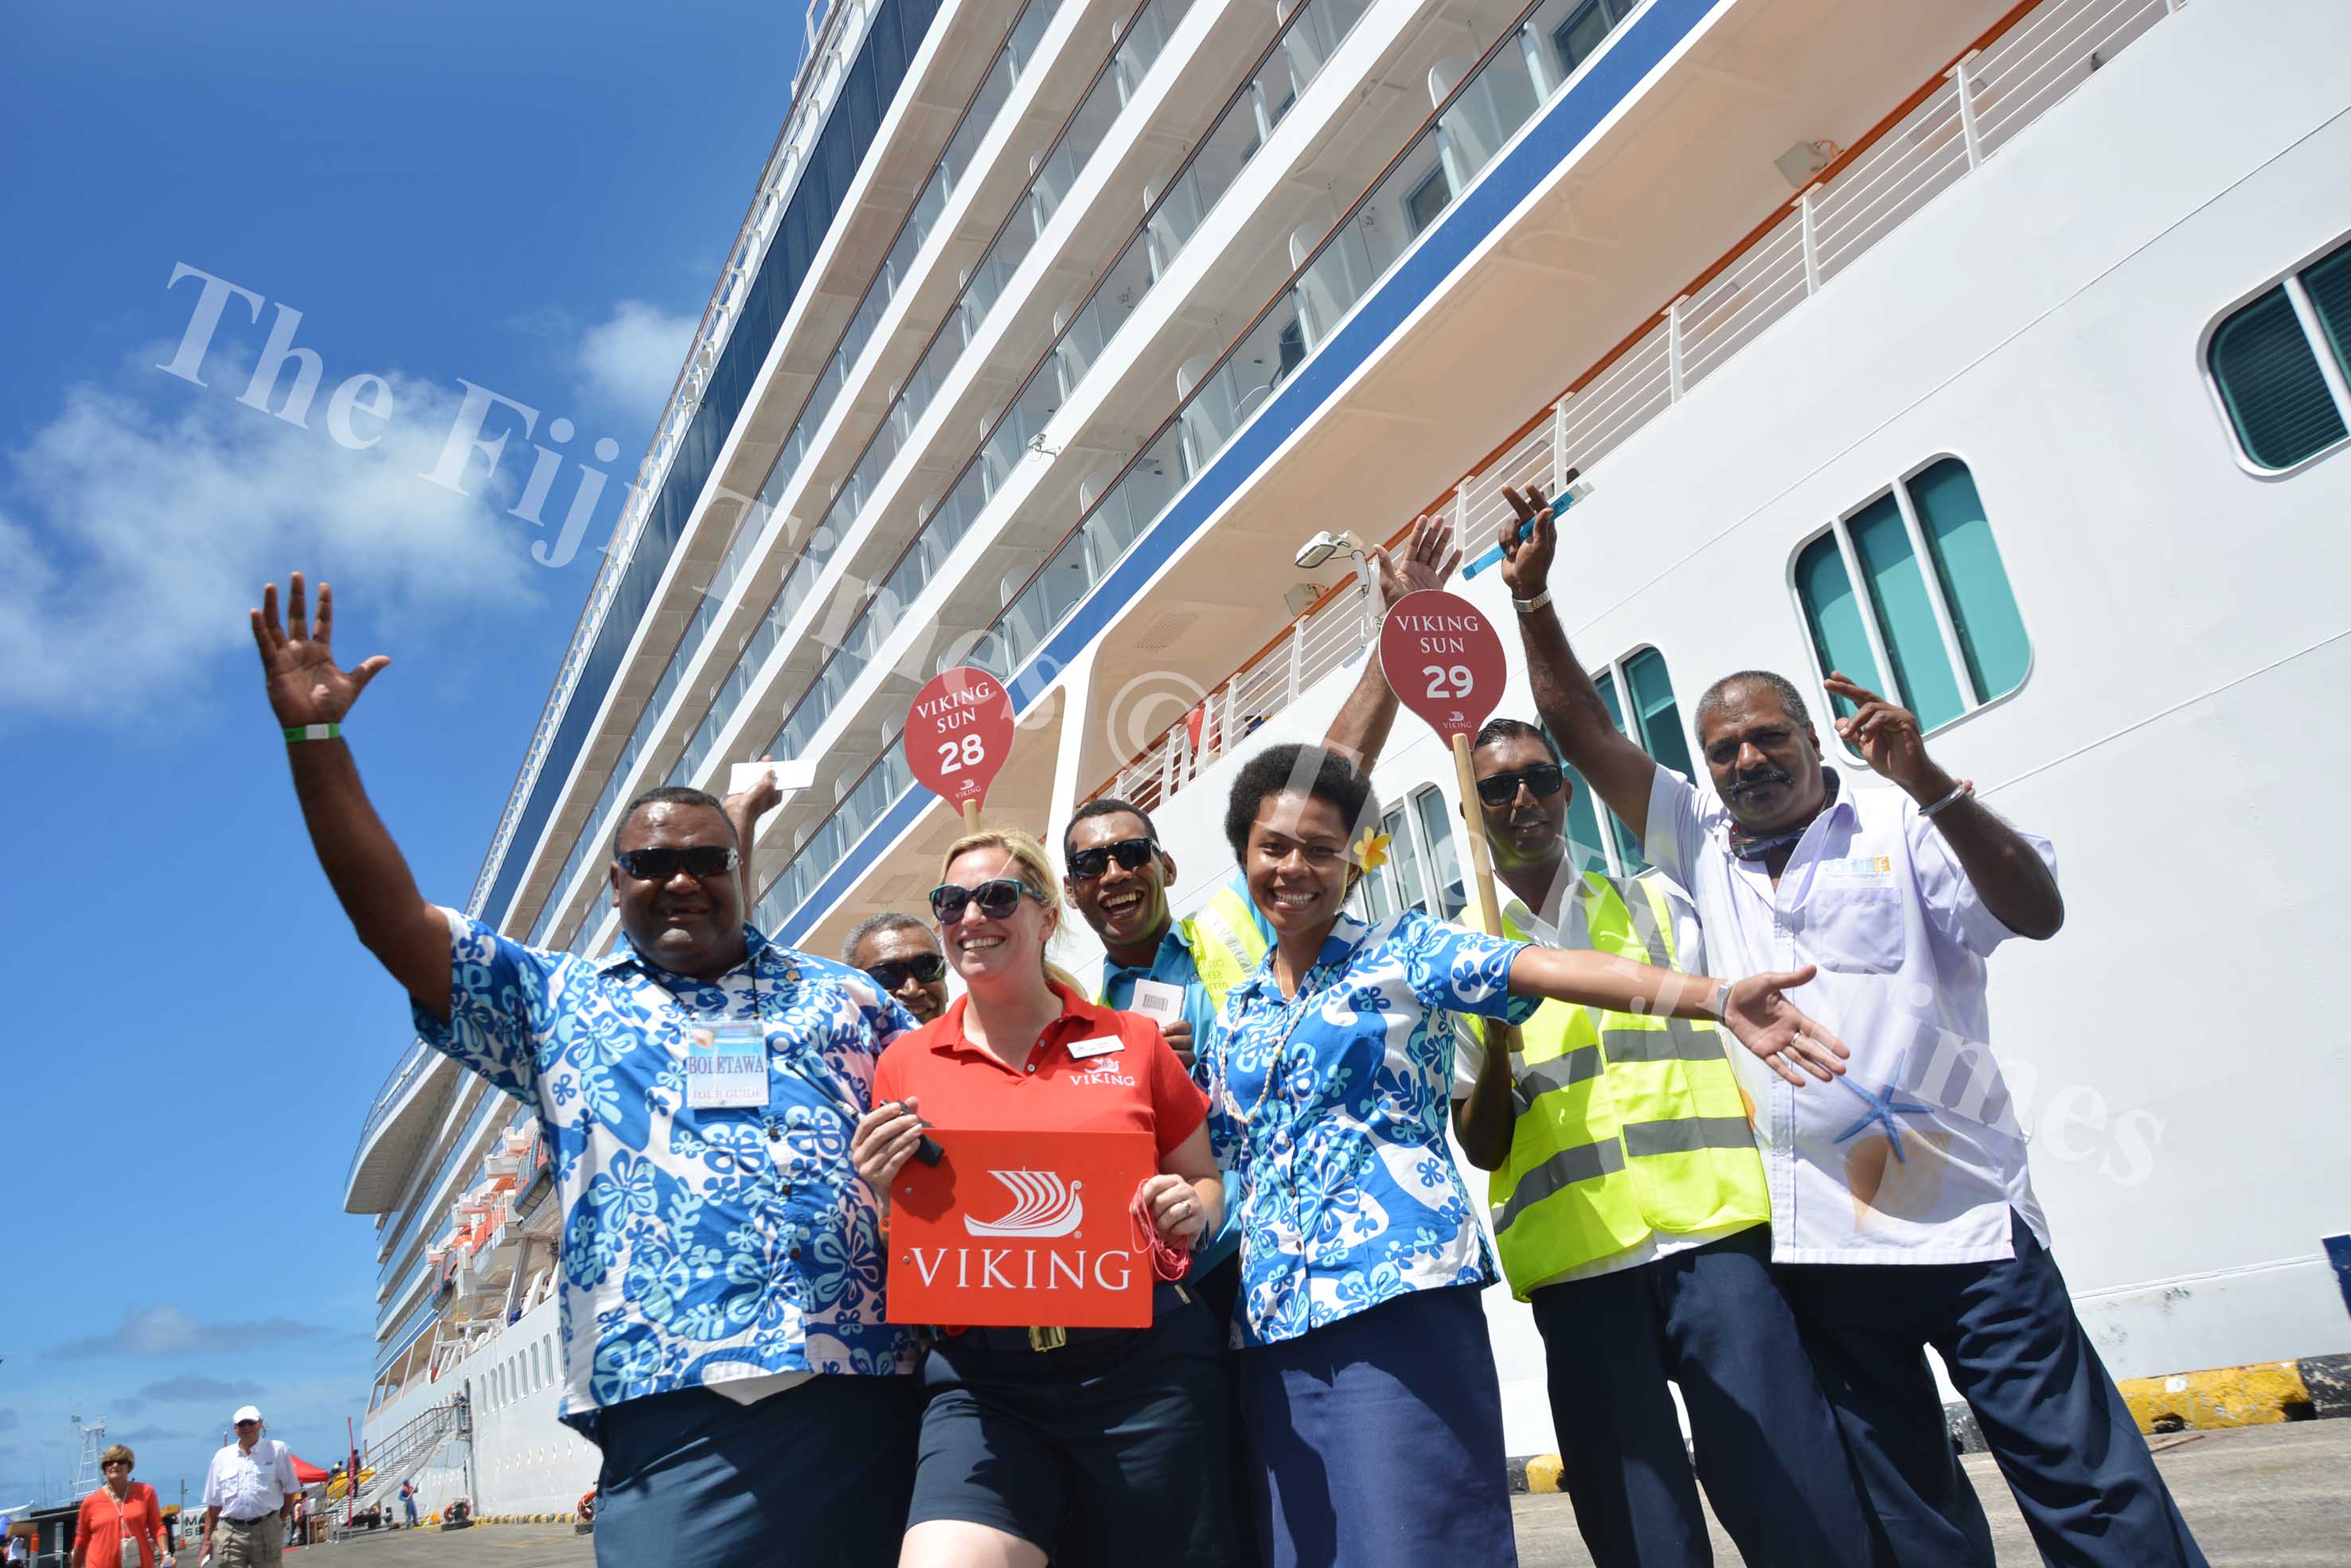 Staff of ARS Pacific with the Vikig Sun Excursions Staff member Tamara Courchay in front of the Viking Sun Cruiseliner berthed at the Kings Wharf in Suva yesterday. Picture: JOVESA NAISUA